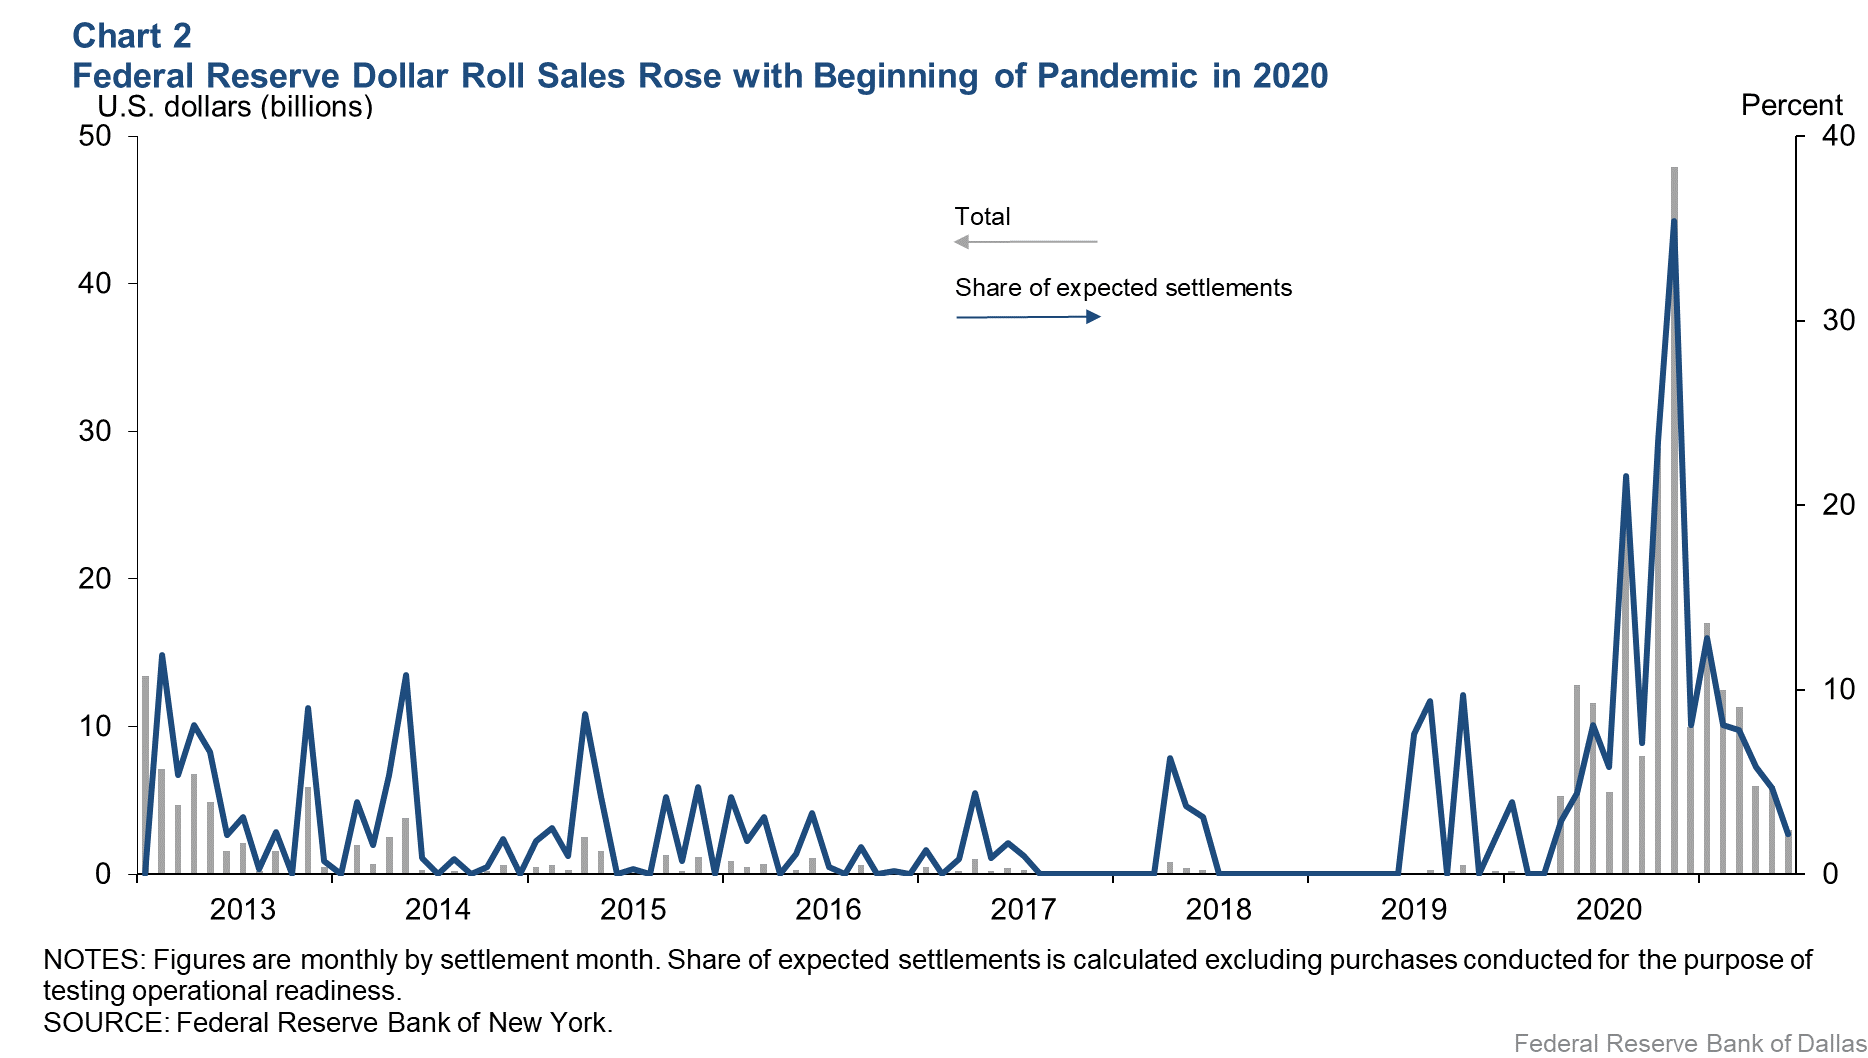 Chart 2: Federal Reserve Dollar Roll Sales Rose With Beginning of Pandemic in 2020